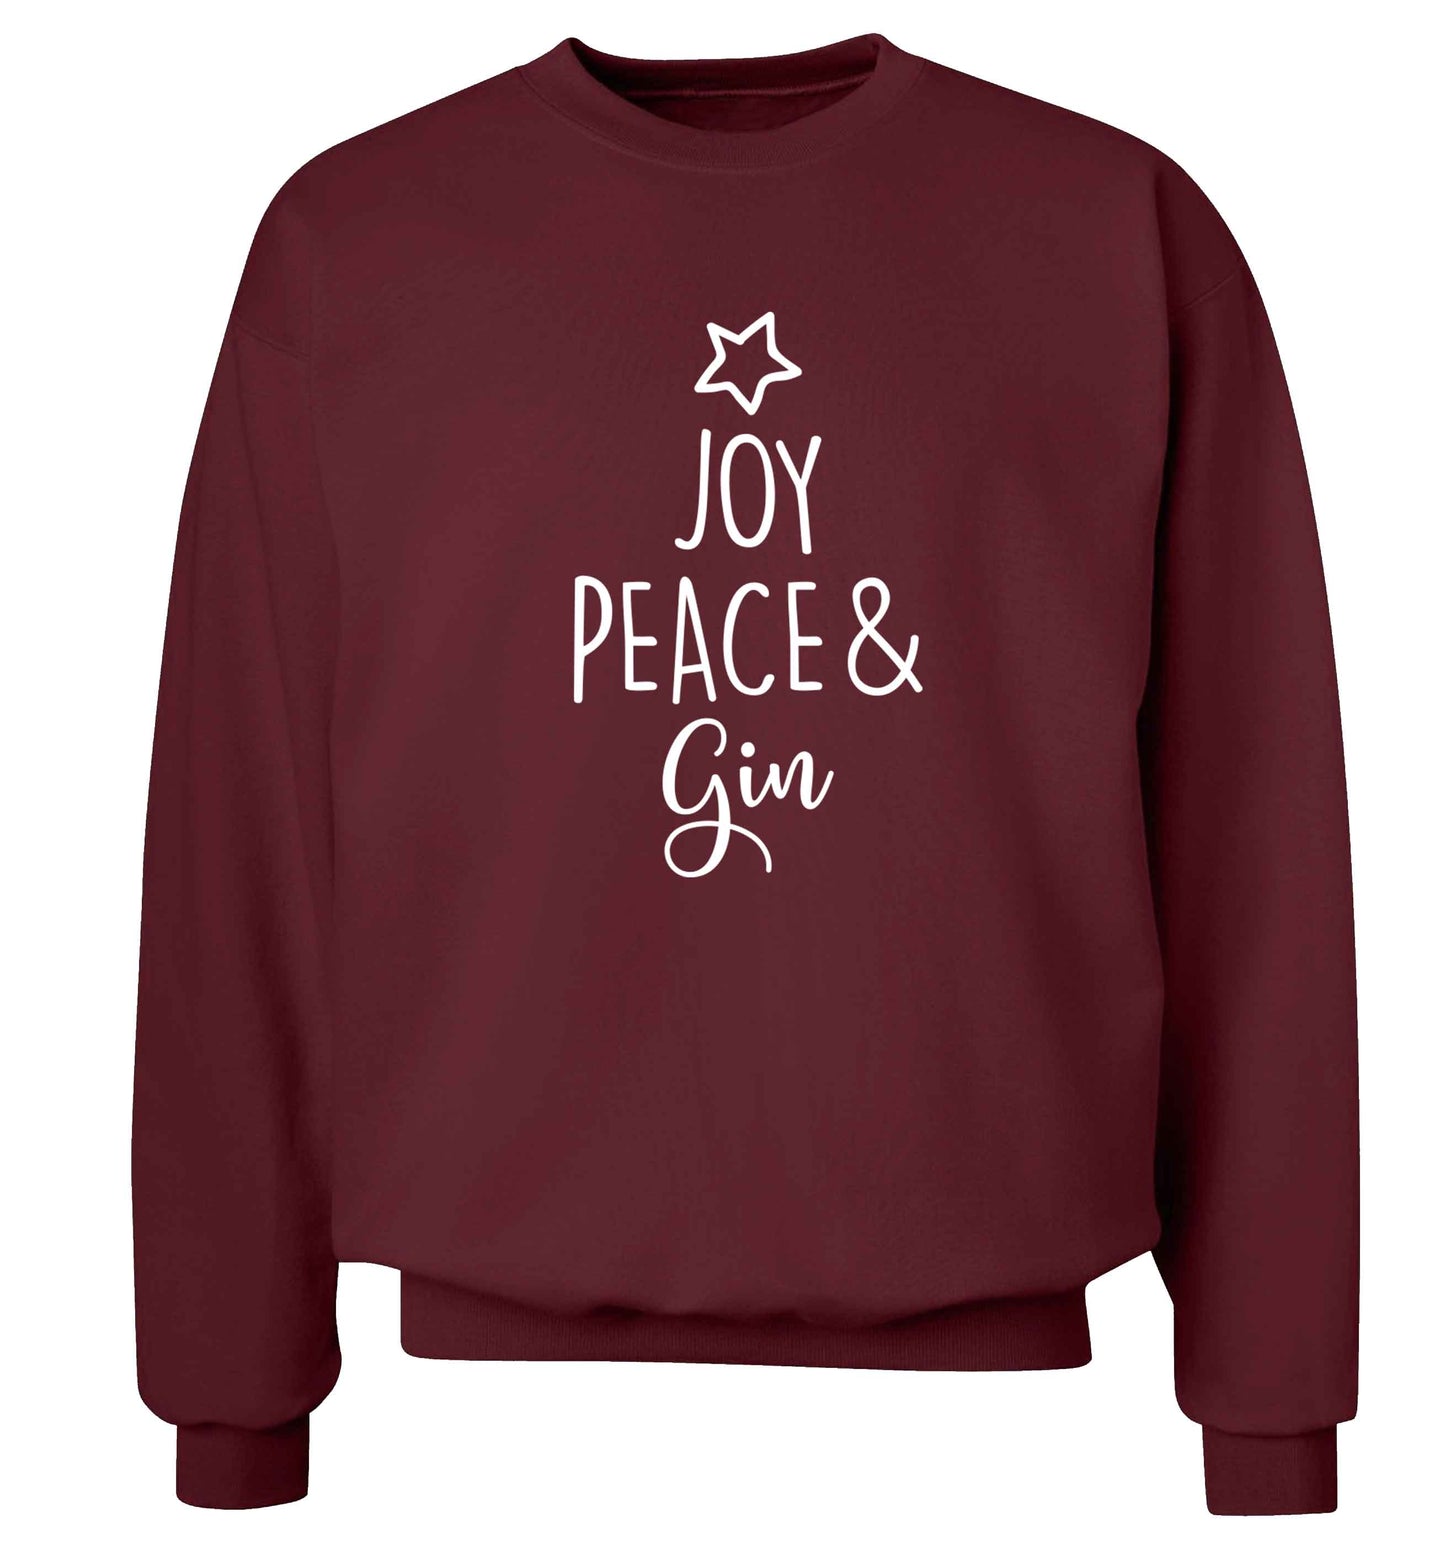 Joy peace and gin Adult's unisex maroon Sweater 2XL